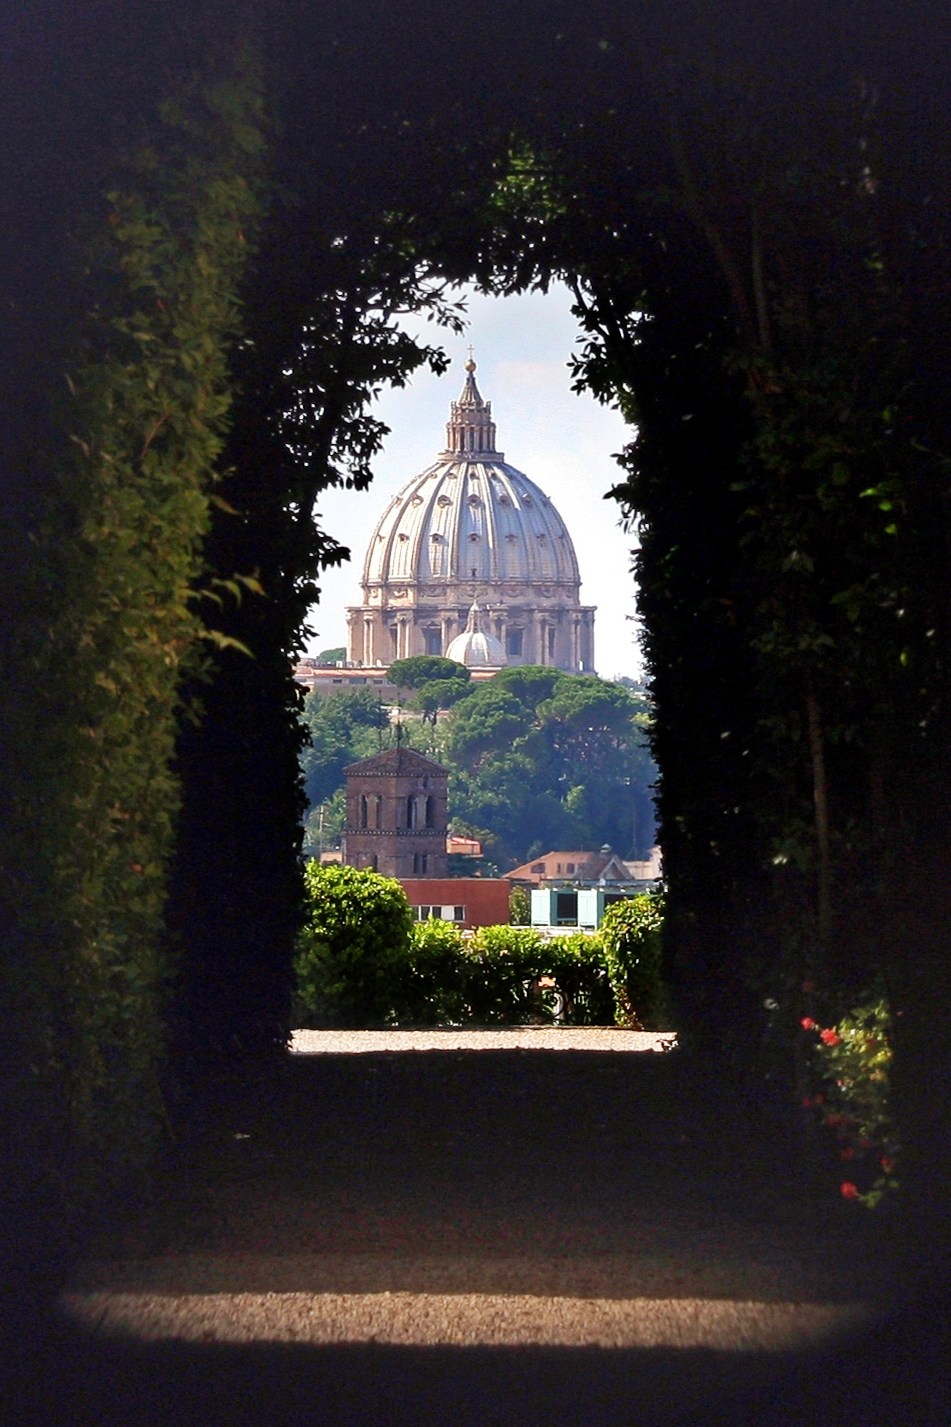 Keyhole view of St. Peter's